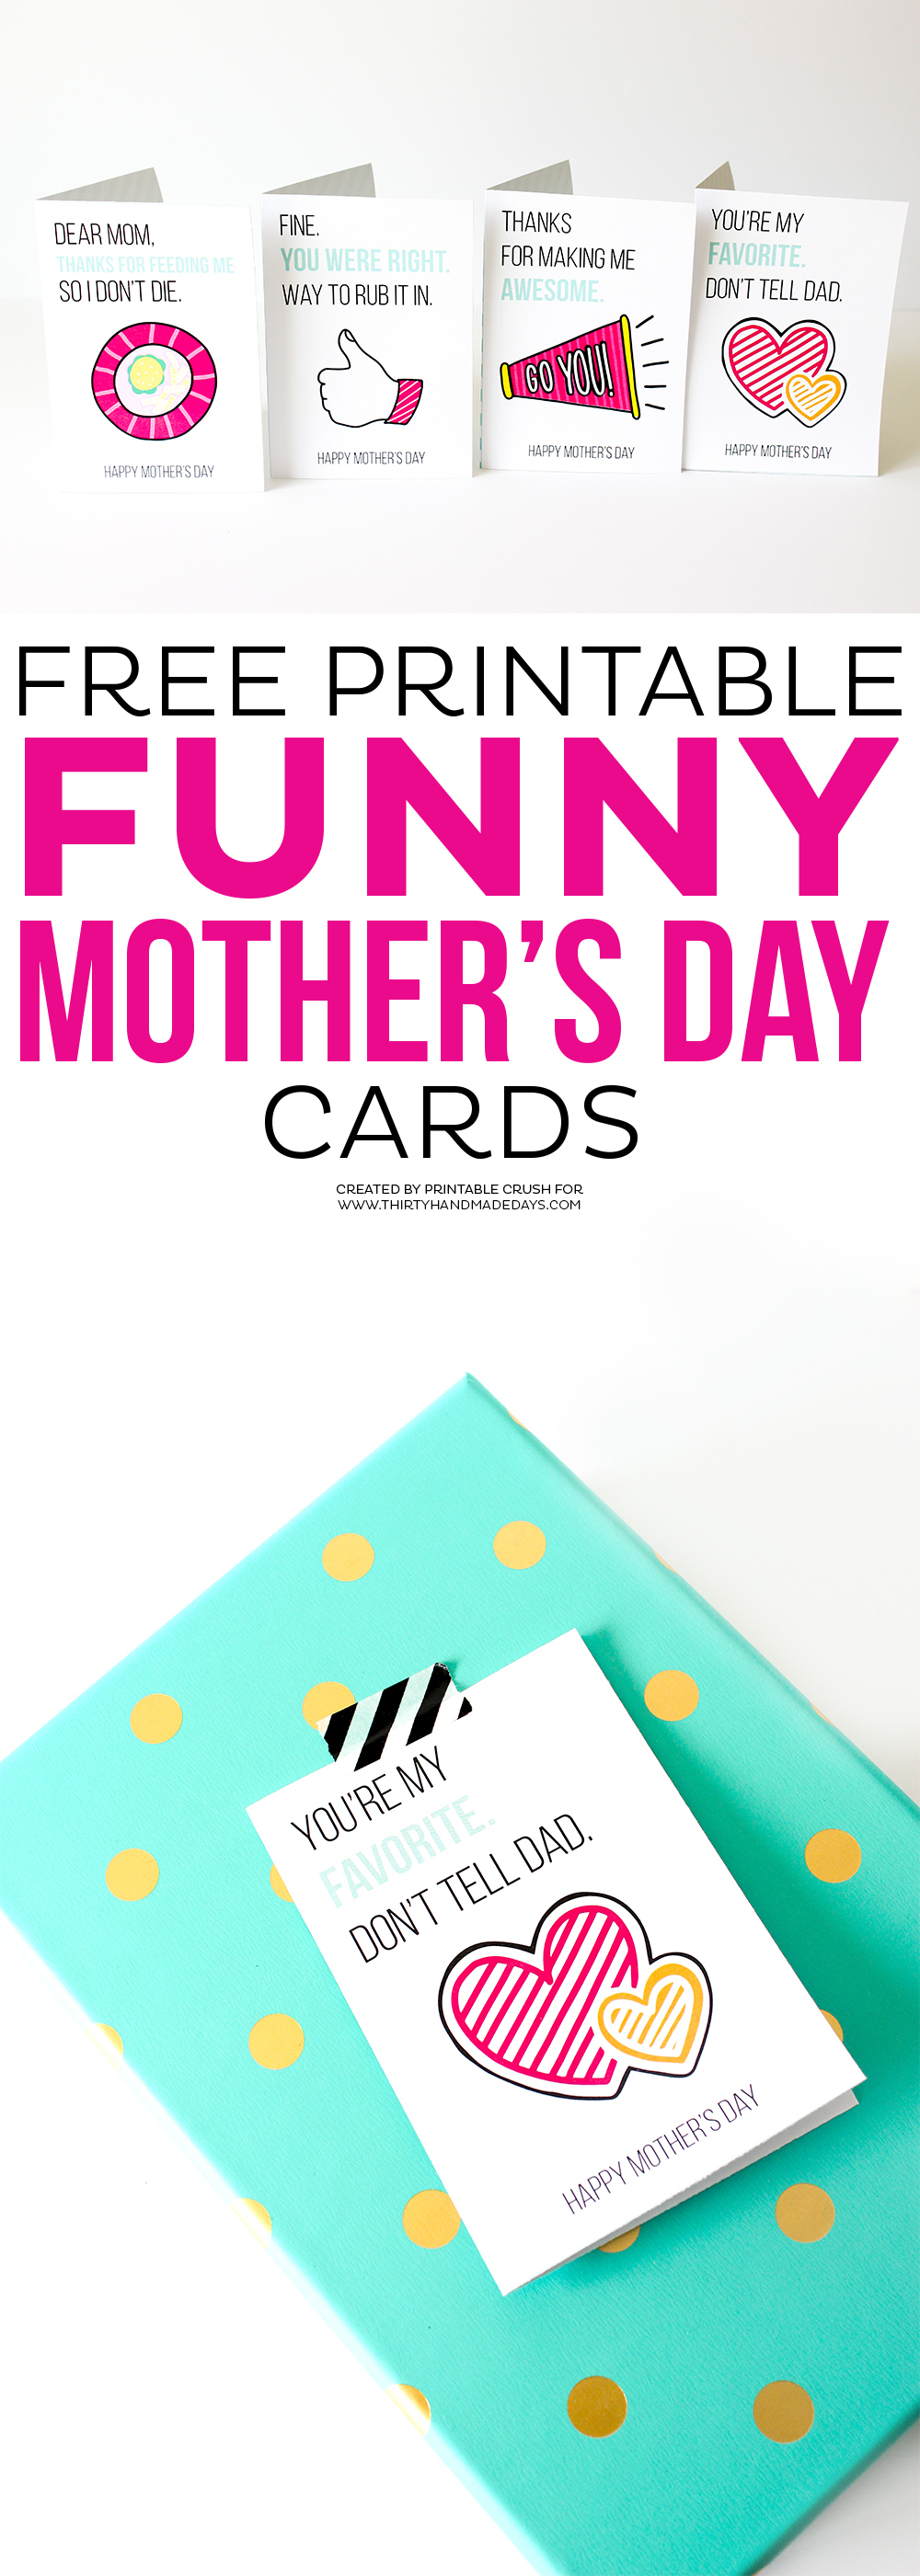 Printable Mother&amp;#039;s Day Cards - Free Printable Funny Mother&amp;#039;s Day Cards